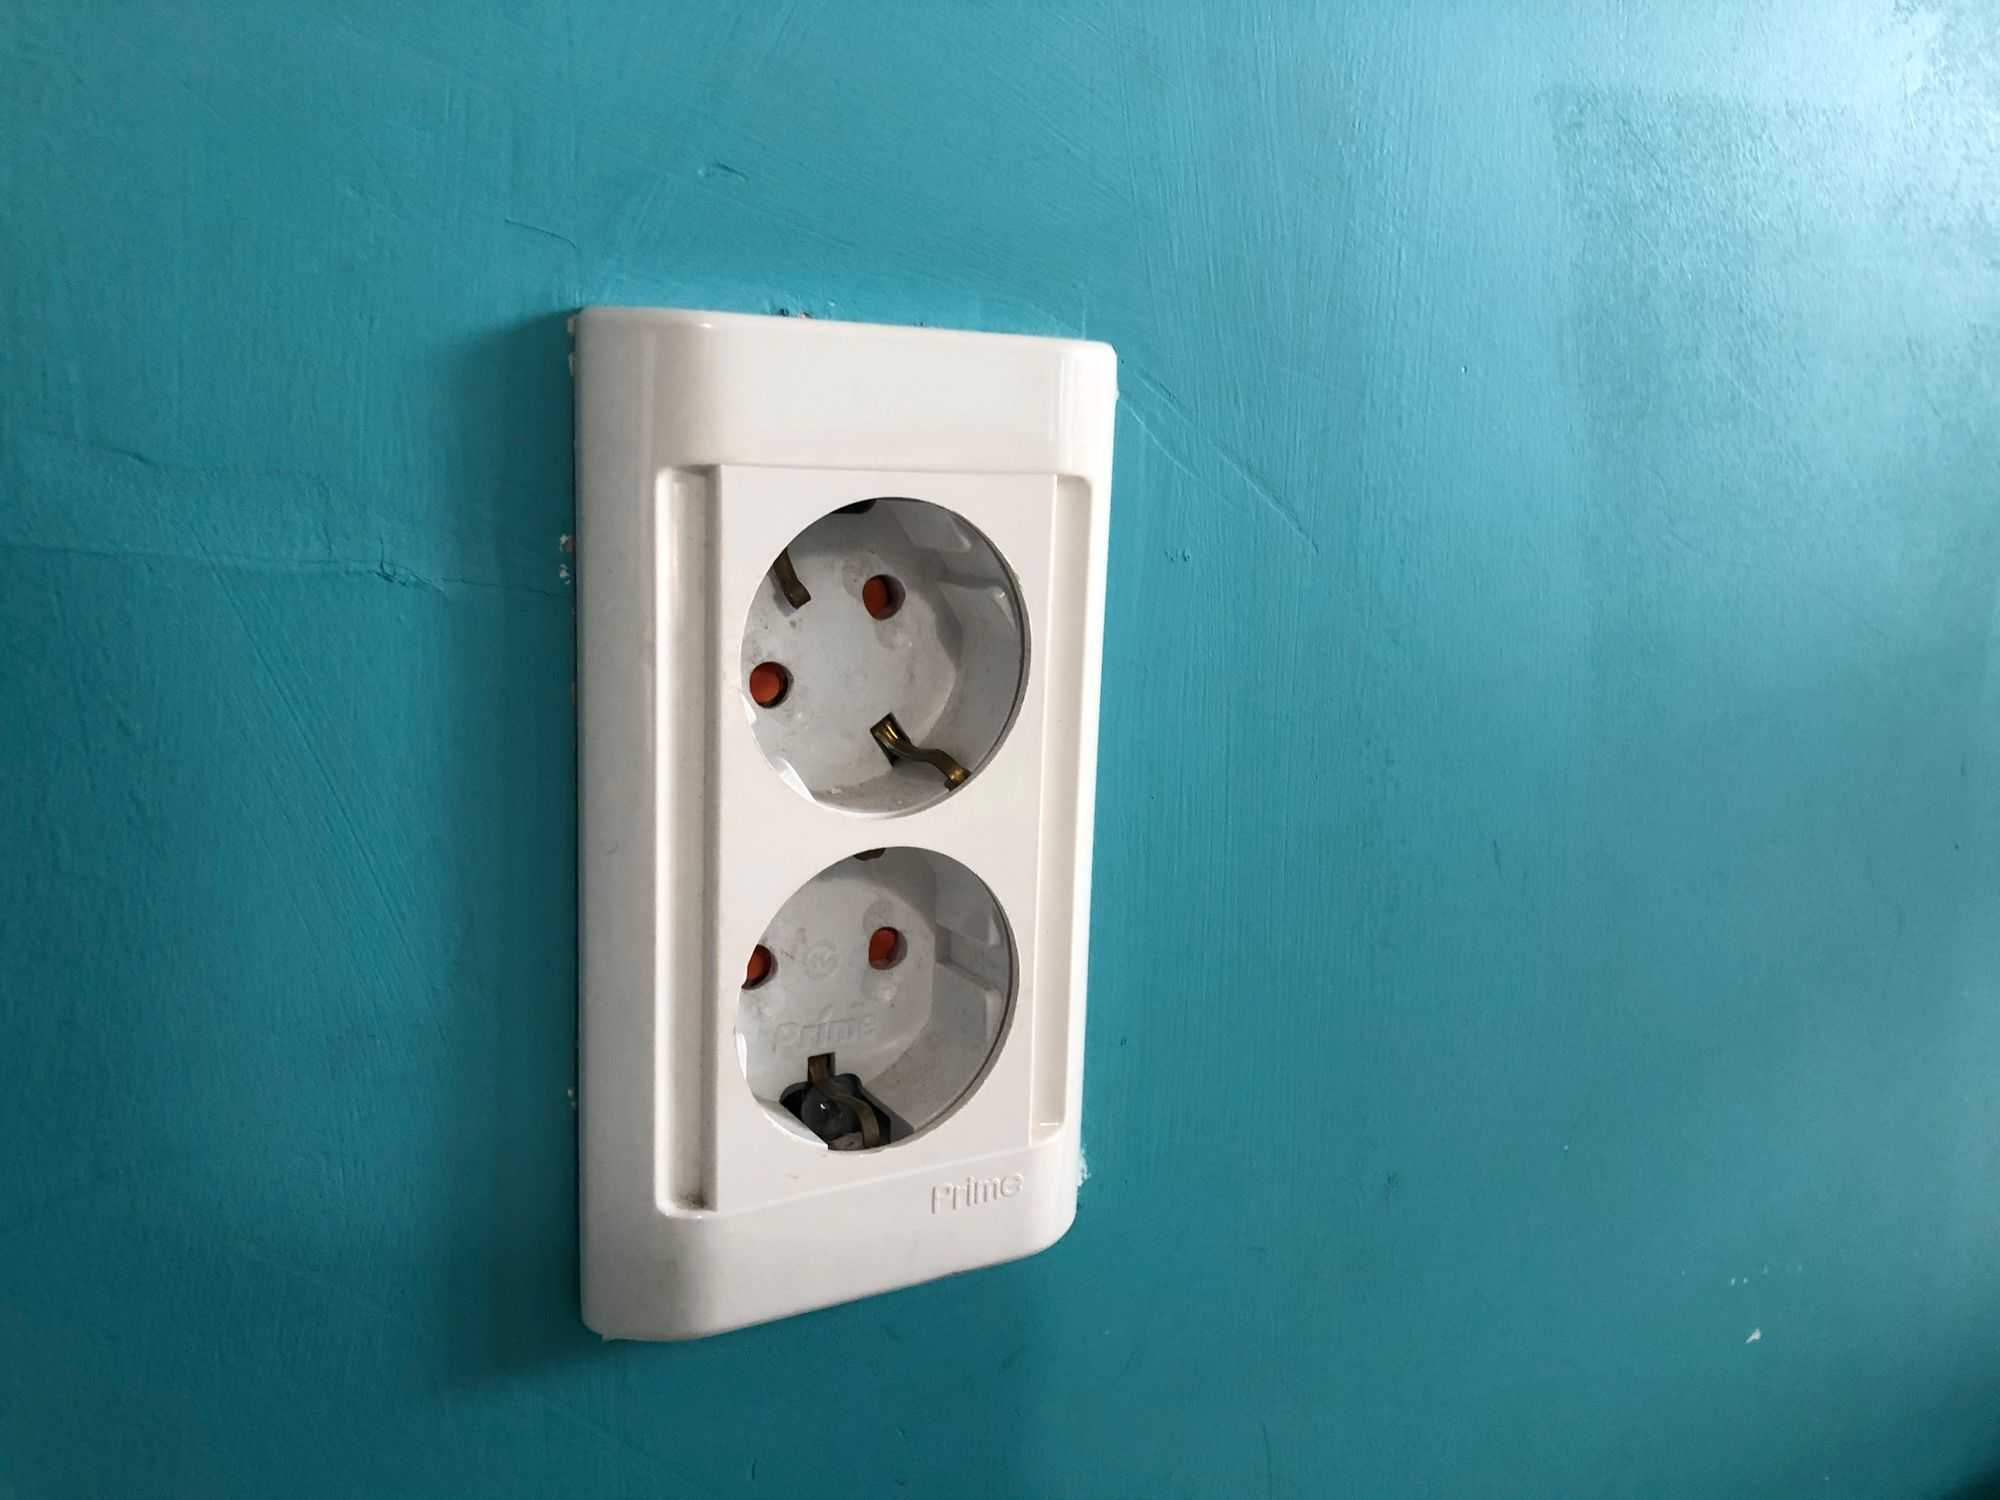 Korean Electric Socket (Image by author)